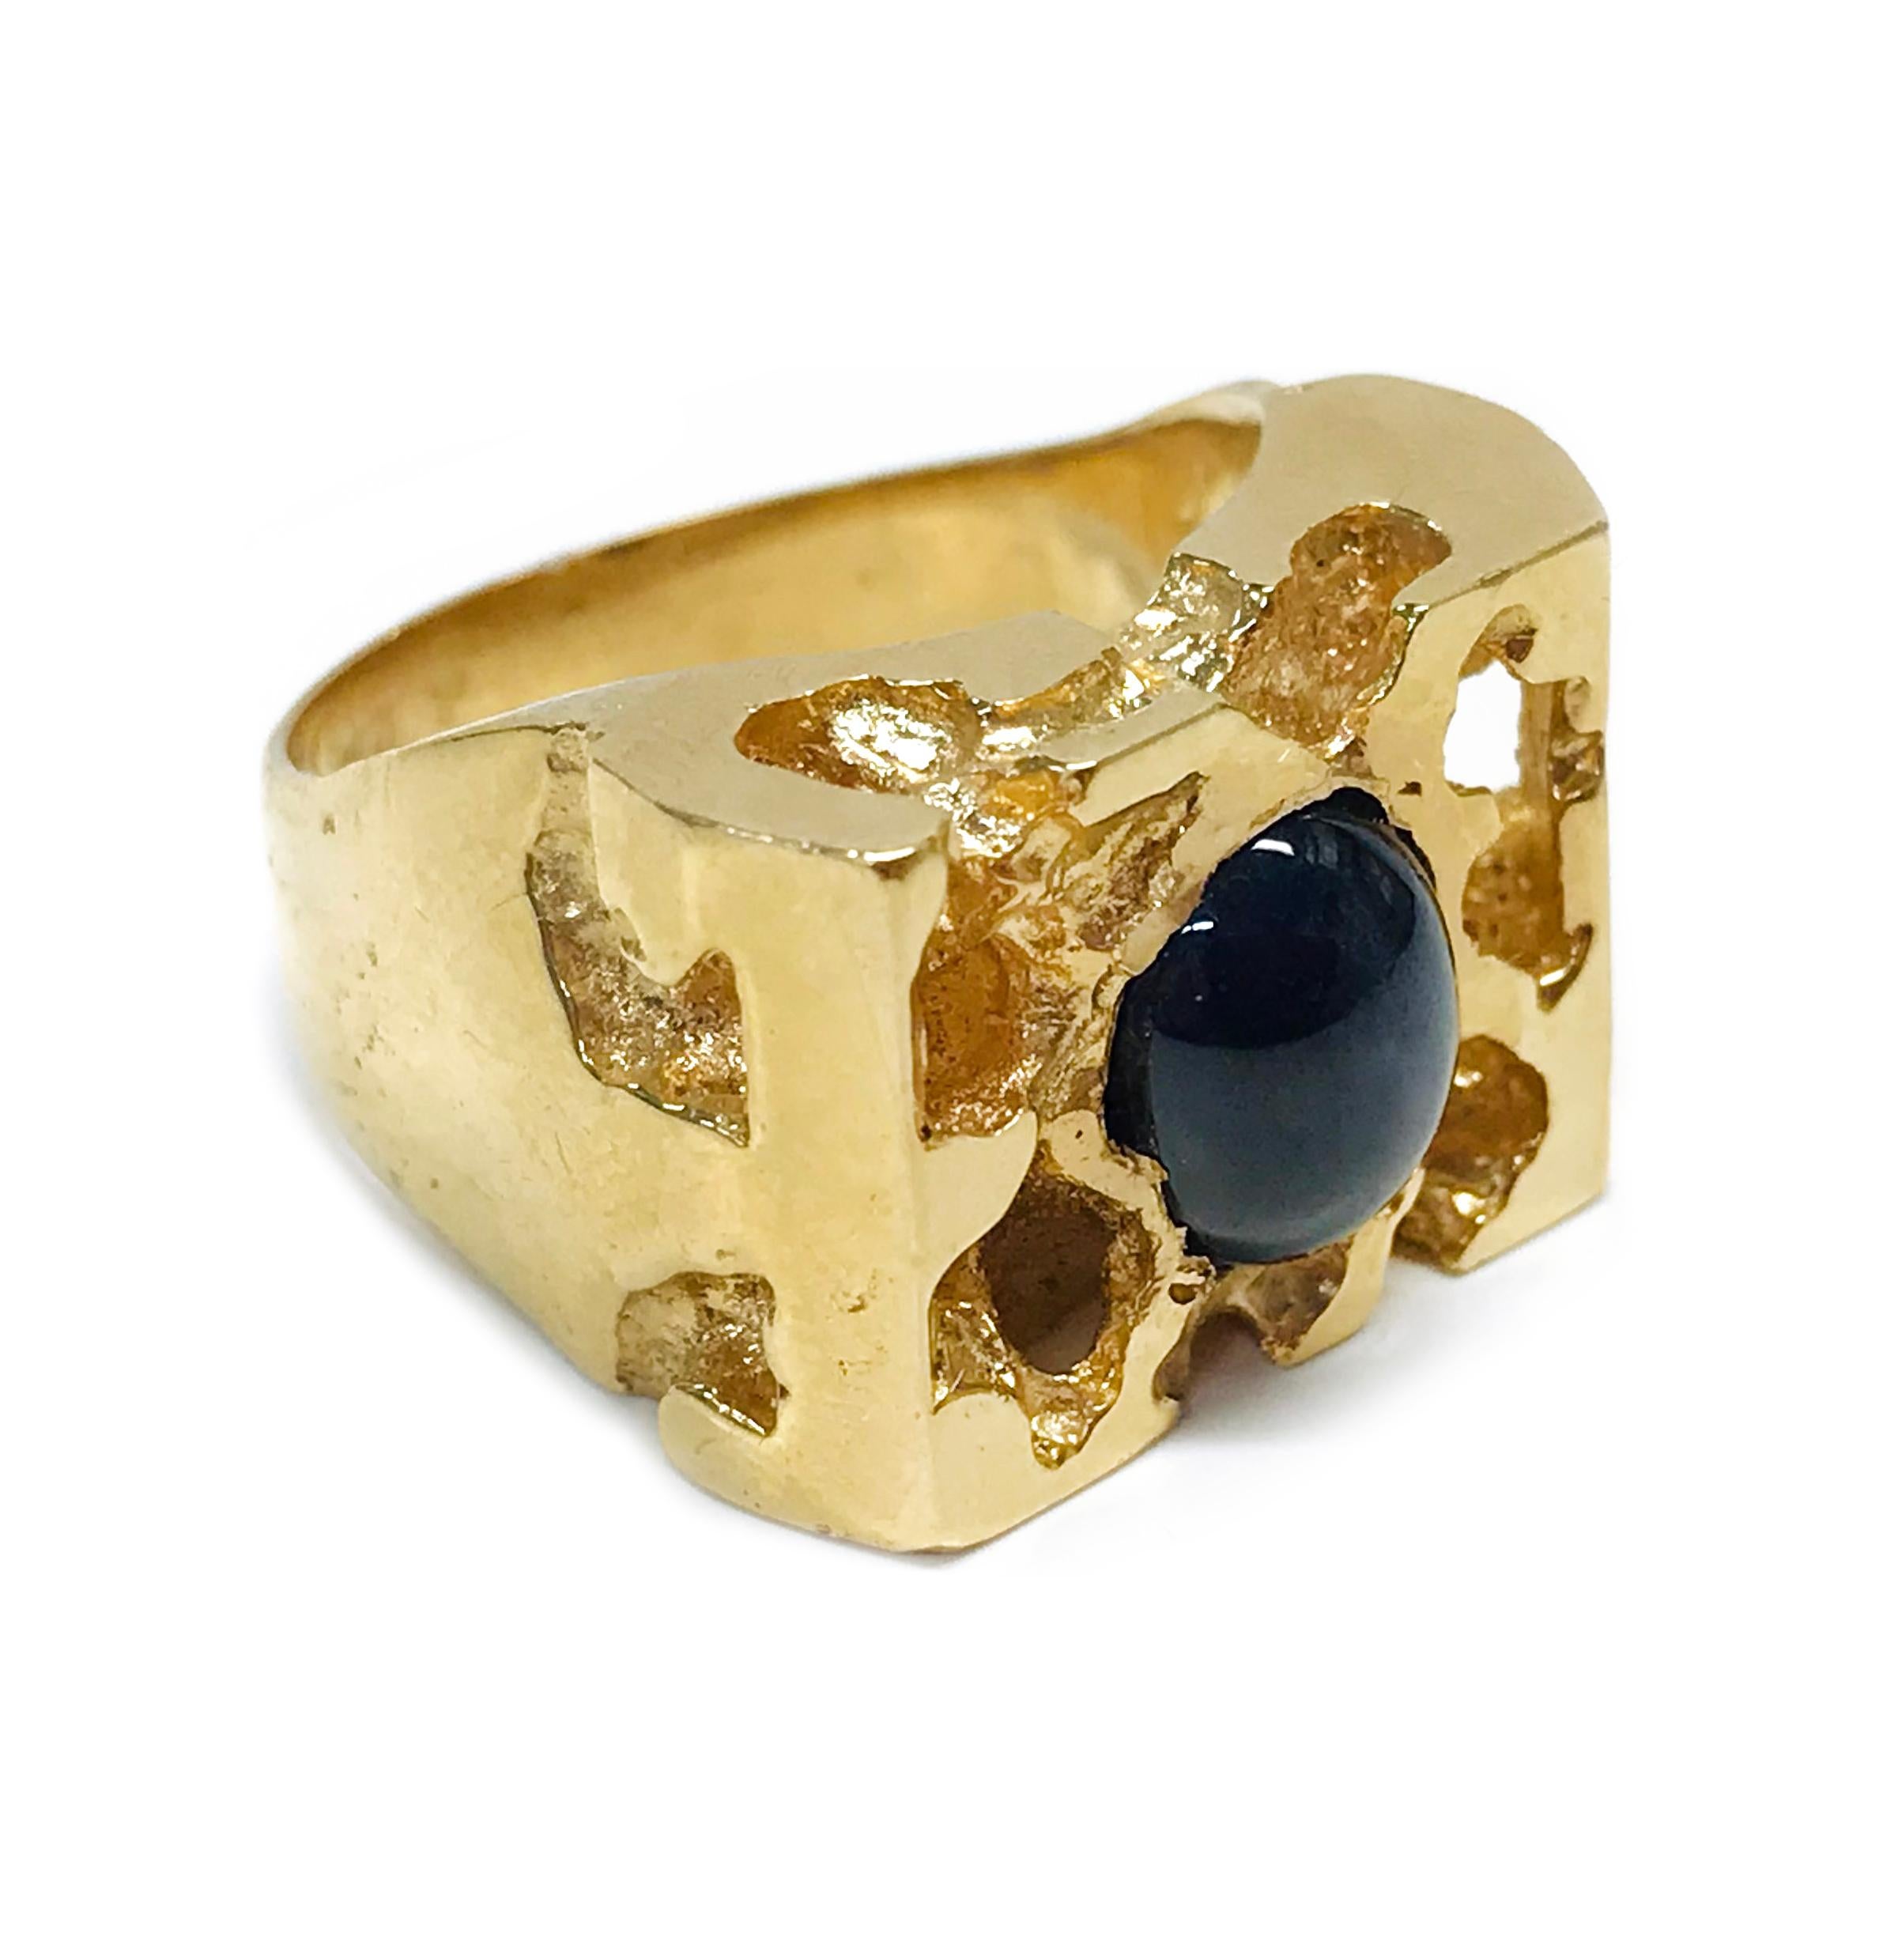 14 Karat Blue Sapphire Nugget Ring. The heavyweight ring features a bezel-set oval blue sapphire cabochon. The sapphire total carat weight is 2.98ct. The rectangular face has a nugget texture that is carried over to the side of the tapering band.